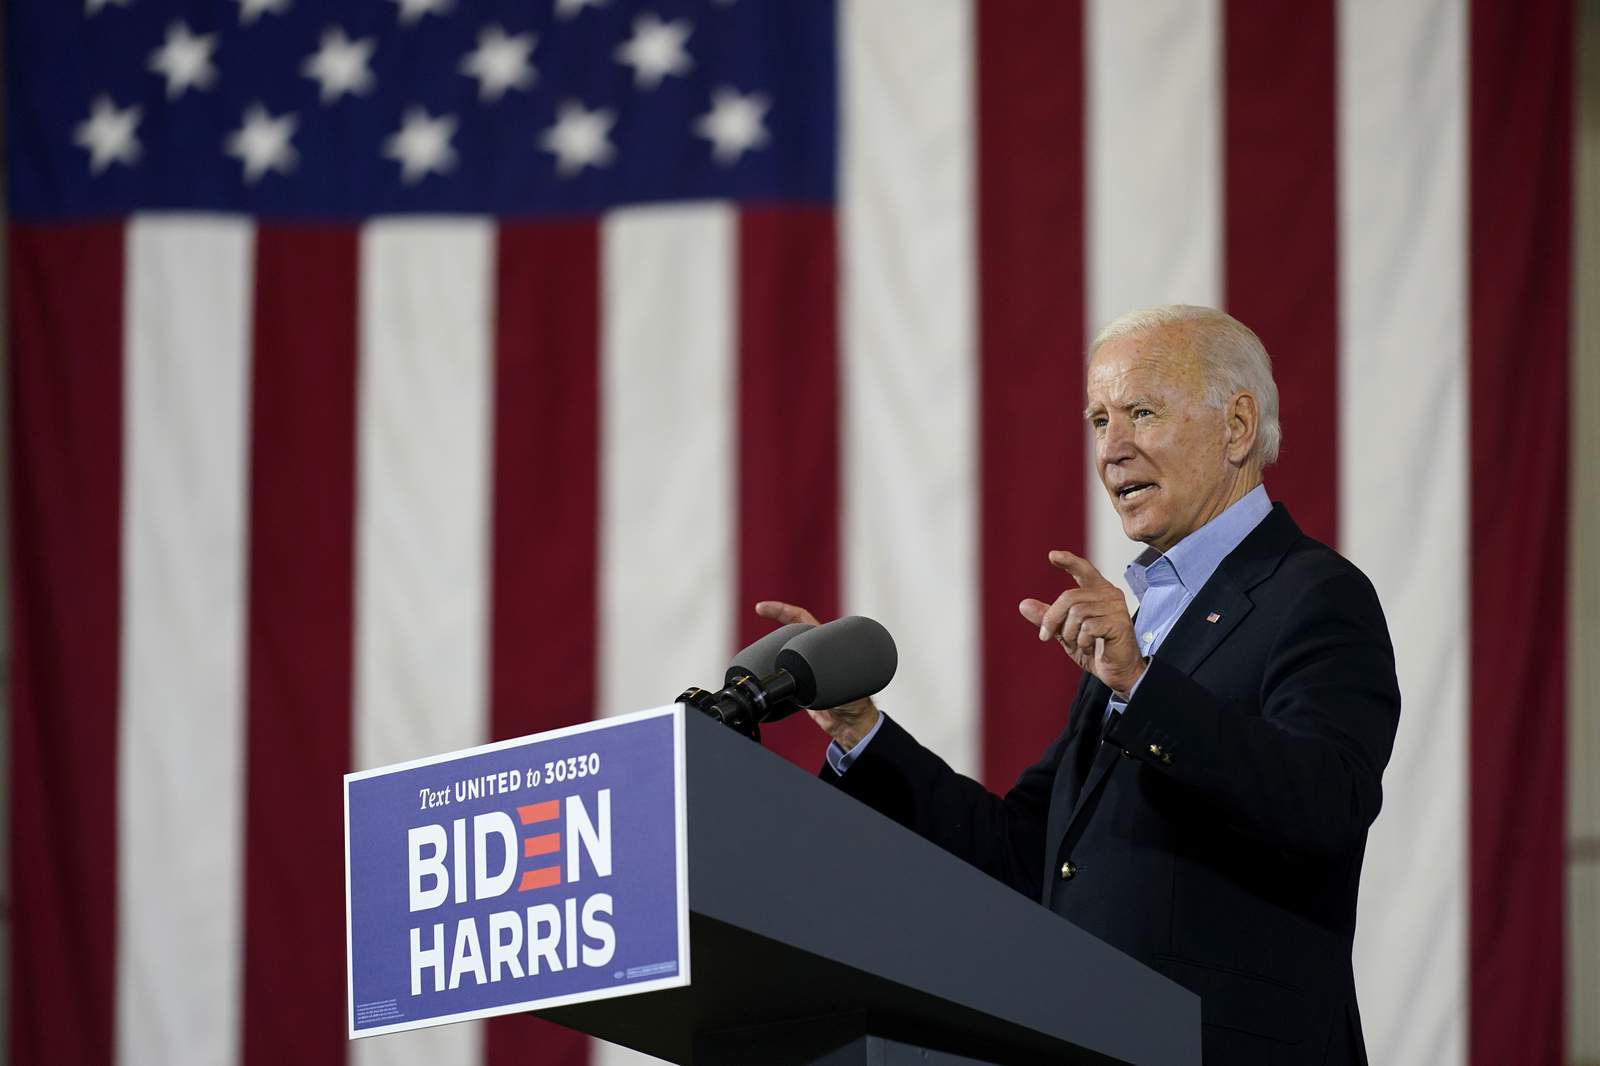 ‘Pennsylvania may be the Florida of 2020’: Political expert explains why Biden is focusing up north